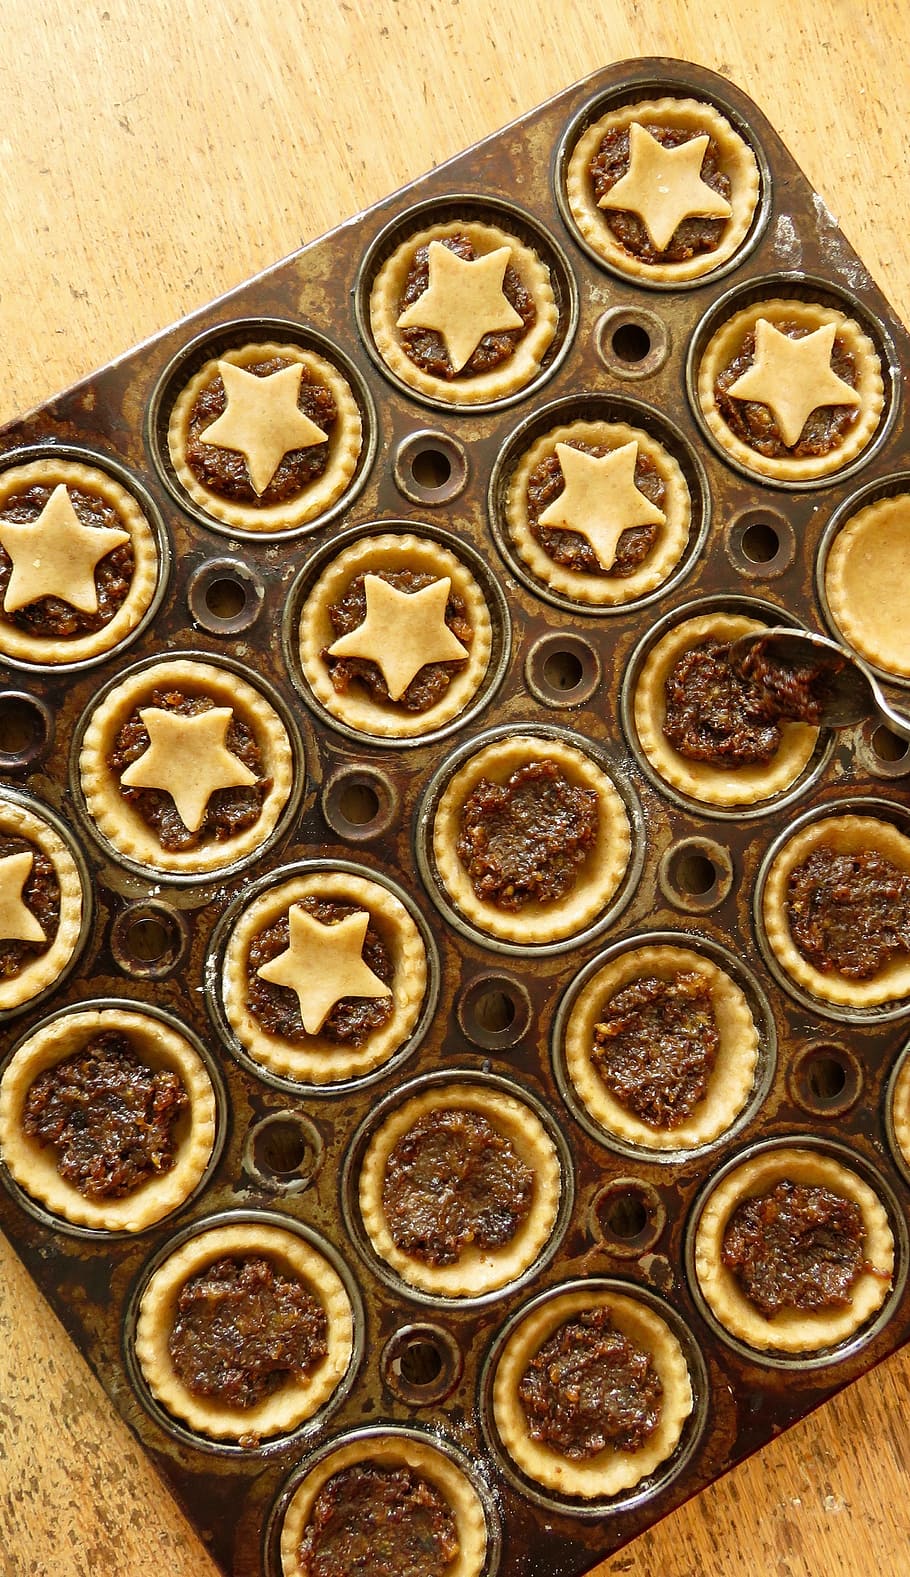 mince pies, christmas, baking, xmas, homemade, mince pie, food, pastry, food and drink, sweet food